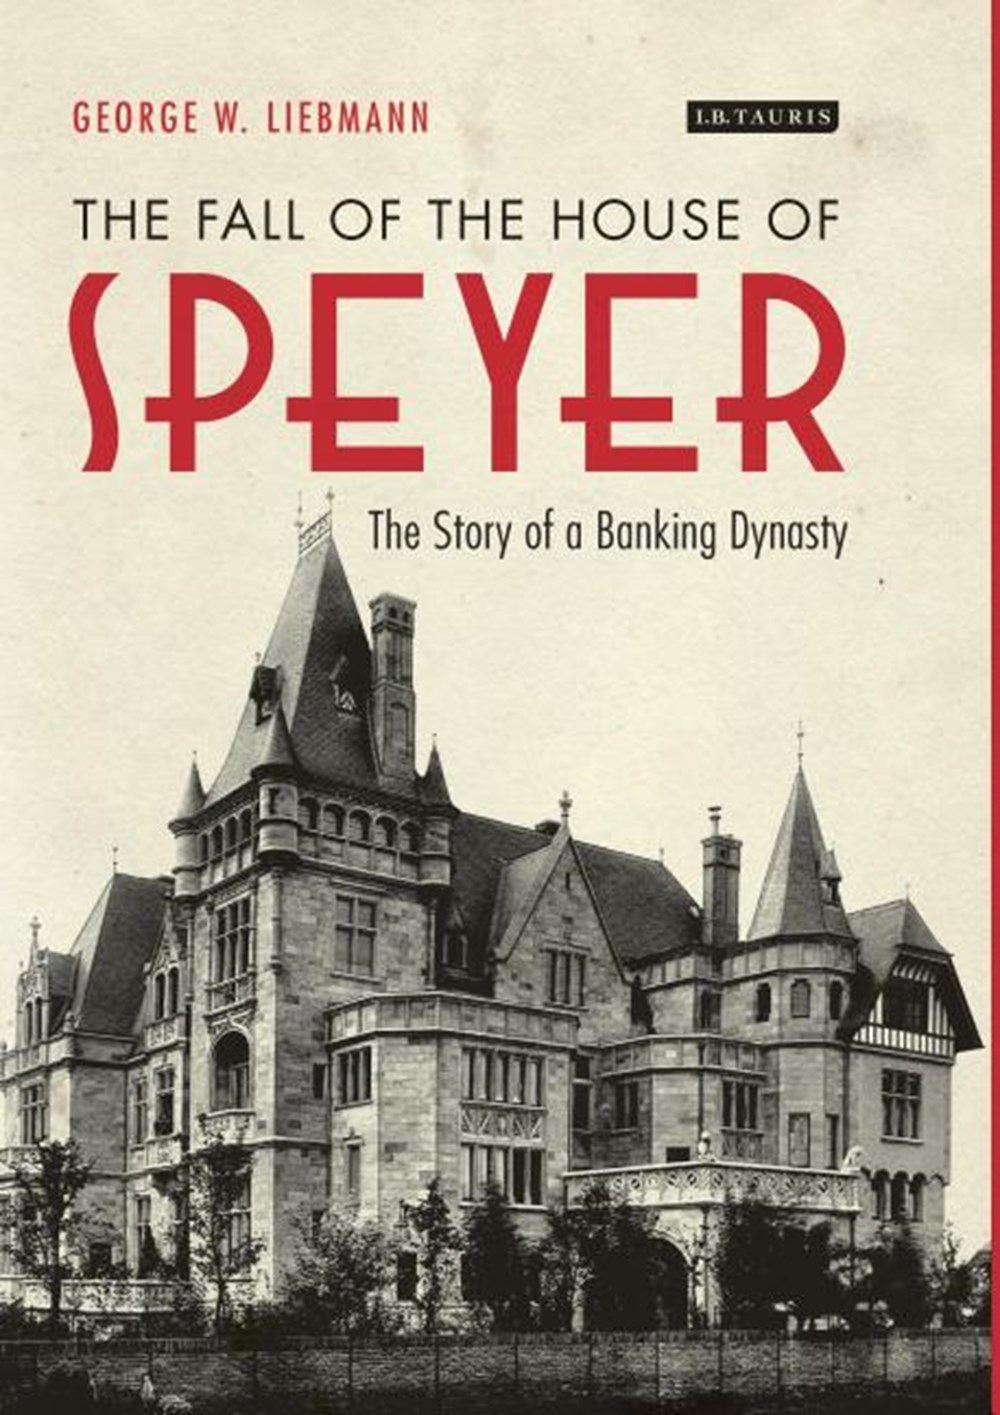 Fall of the House of Speyer The Story of a Banking Dynasty